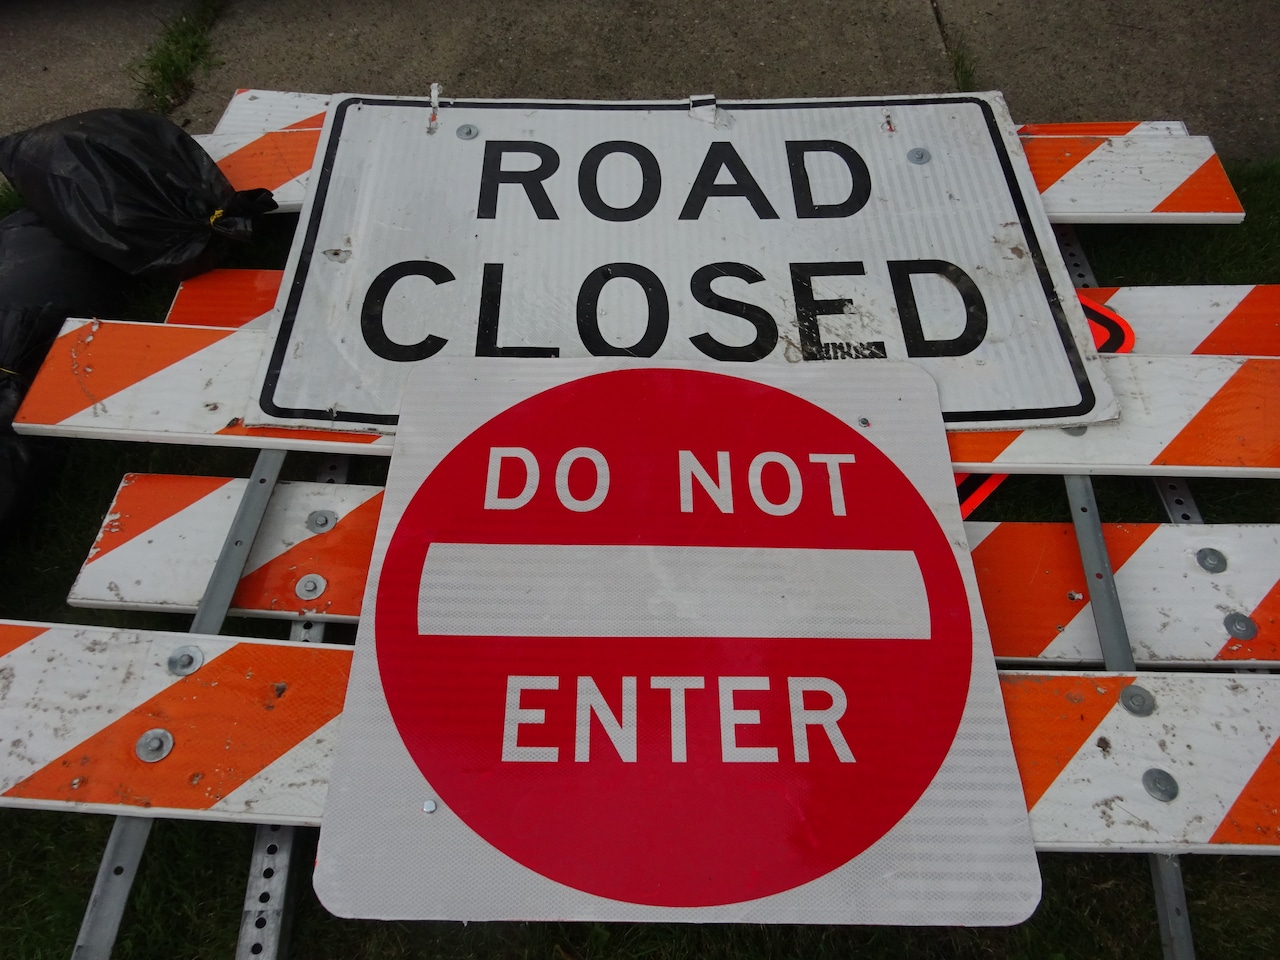 Sudbury Street in Boston closed during Wed. evening commute, could impact traffic [Video]